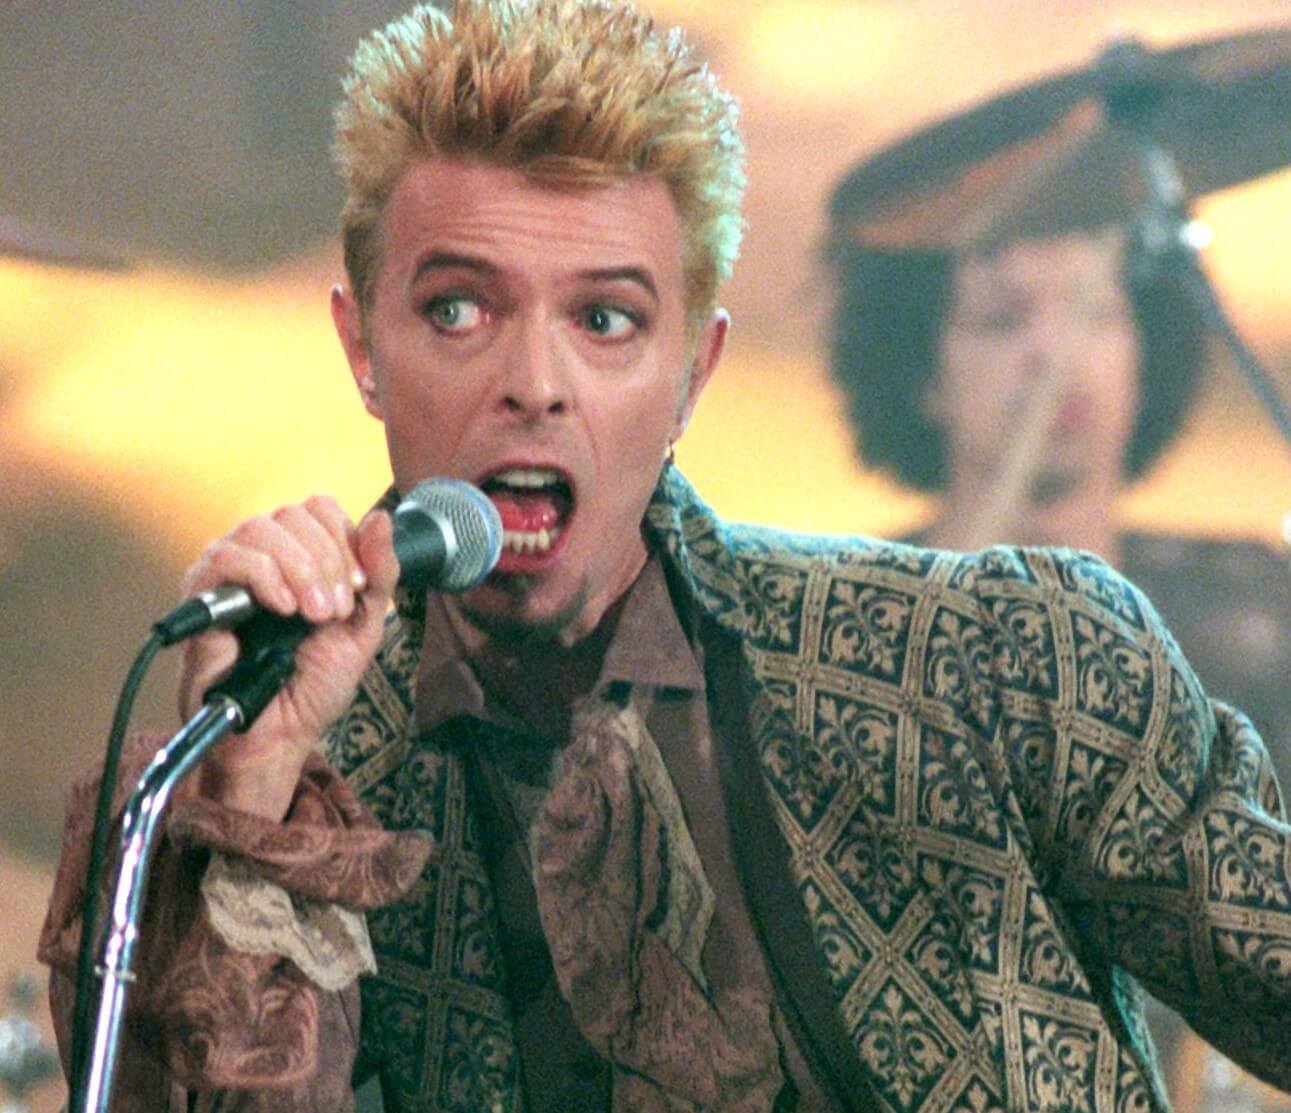 "Let's Dance" singer David Bowie at the mic